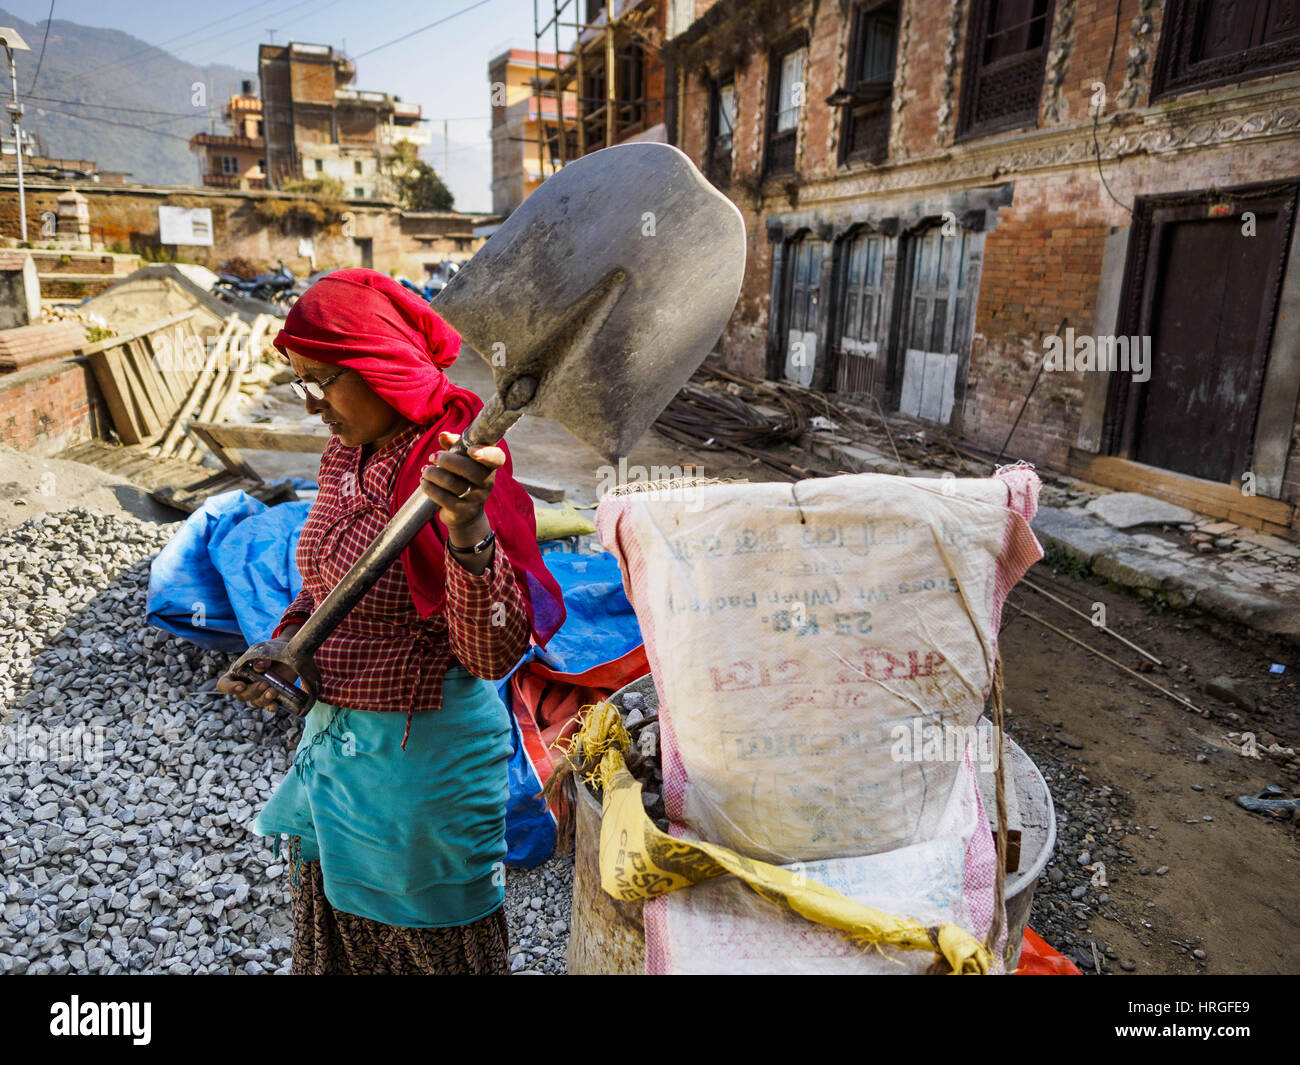 Sankhu, Central Development Region, Nepal. 2nd Mar, 2017. A laborer fills a basket with gravel for a home being rebuilt in Sankhu after the 2015 earthquake. The building on the right is a 300 year old home that is no longer usable and will be torn down. There is more construction and rebuilding going on in Sankhu, west of central Kathmandu, than in many other parts of the Kathmandu Valley nearly two years after the earthquake of 25 April 2015 that devastated Nepal. In some villages in the Kathmandu valley workers are working by hand to remove ruble and dig out destroyed buildings. About 9, 00 Stock Photo